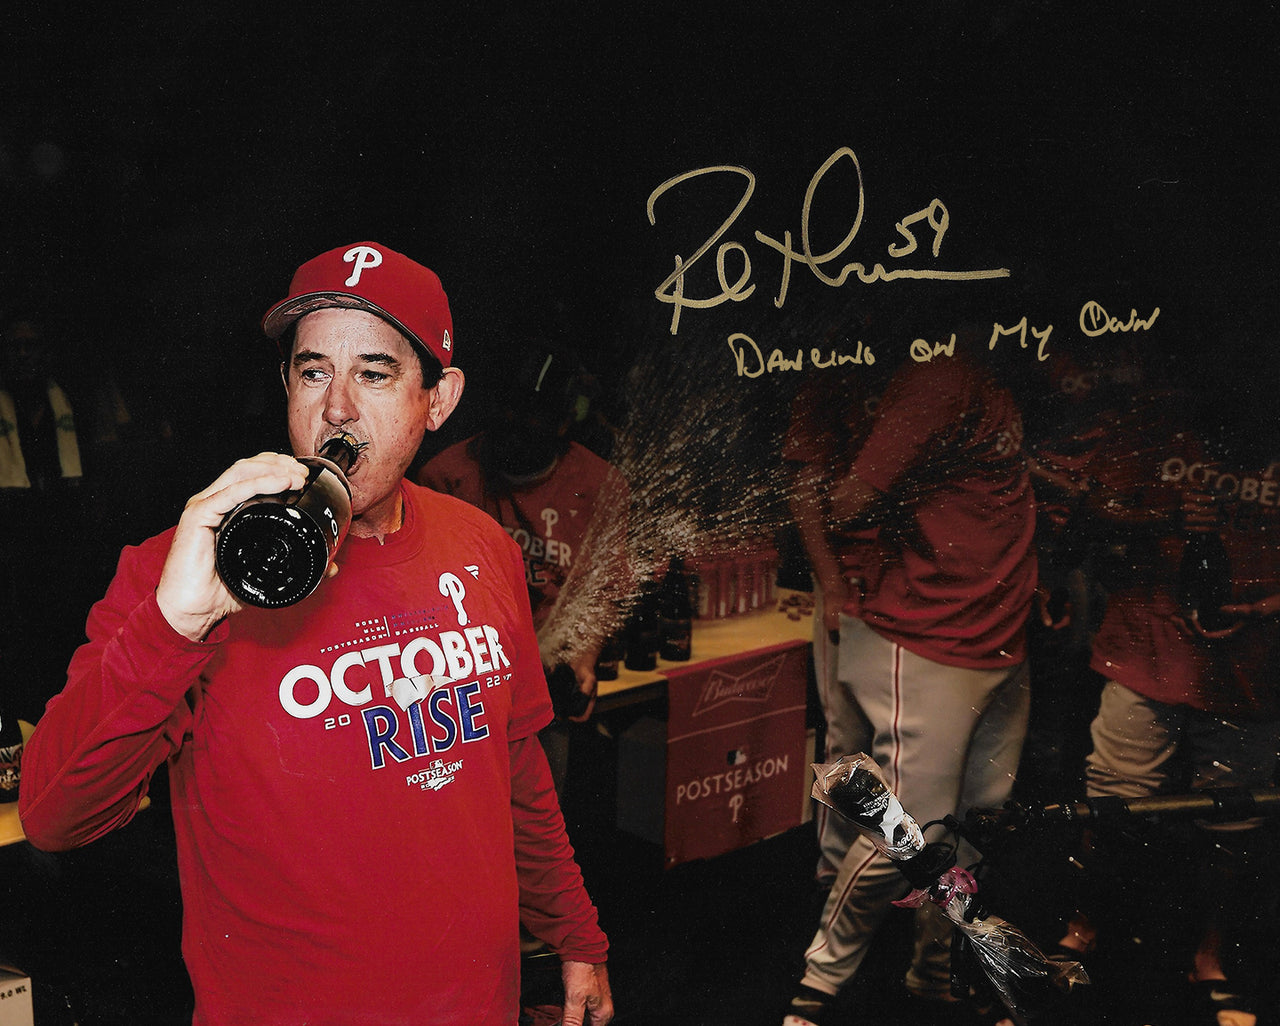 Rob Thomson NL Champs Locker Room Philadelphia Phillies Autographed 16x20 Photo (Dancing on my Own) - Dynasty Sports & Framing 